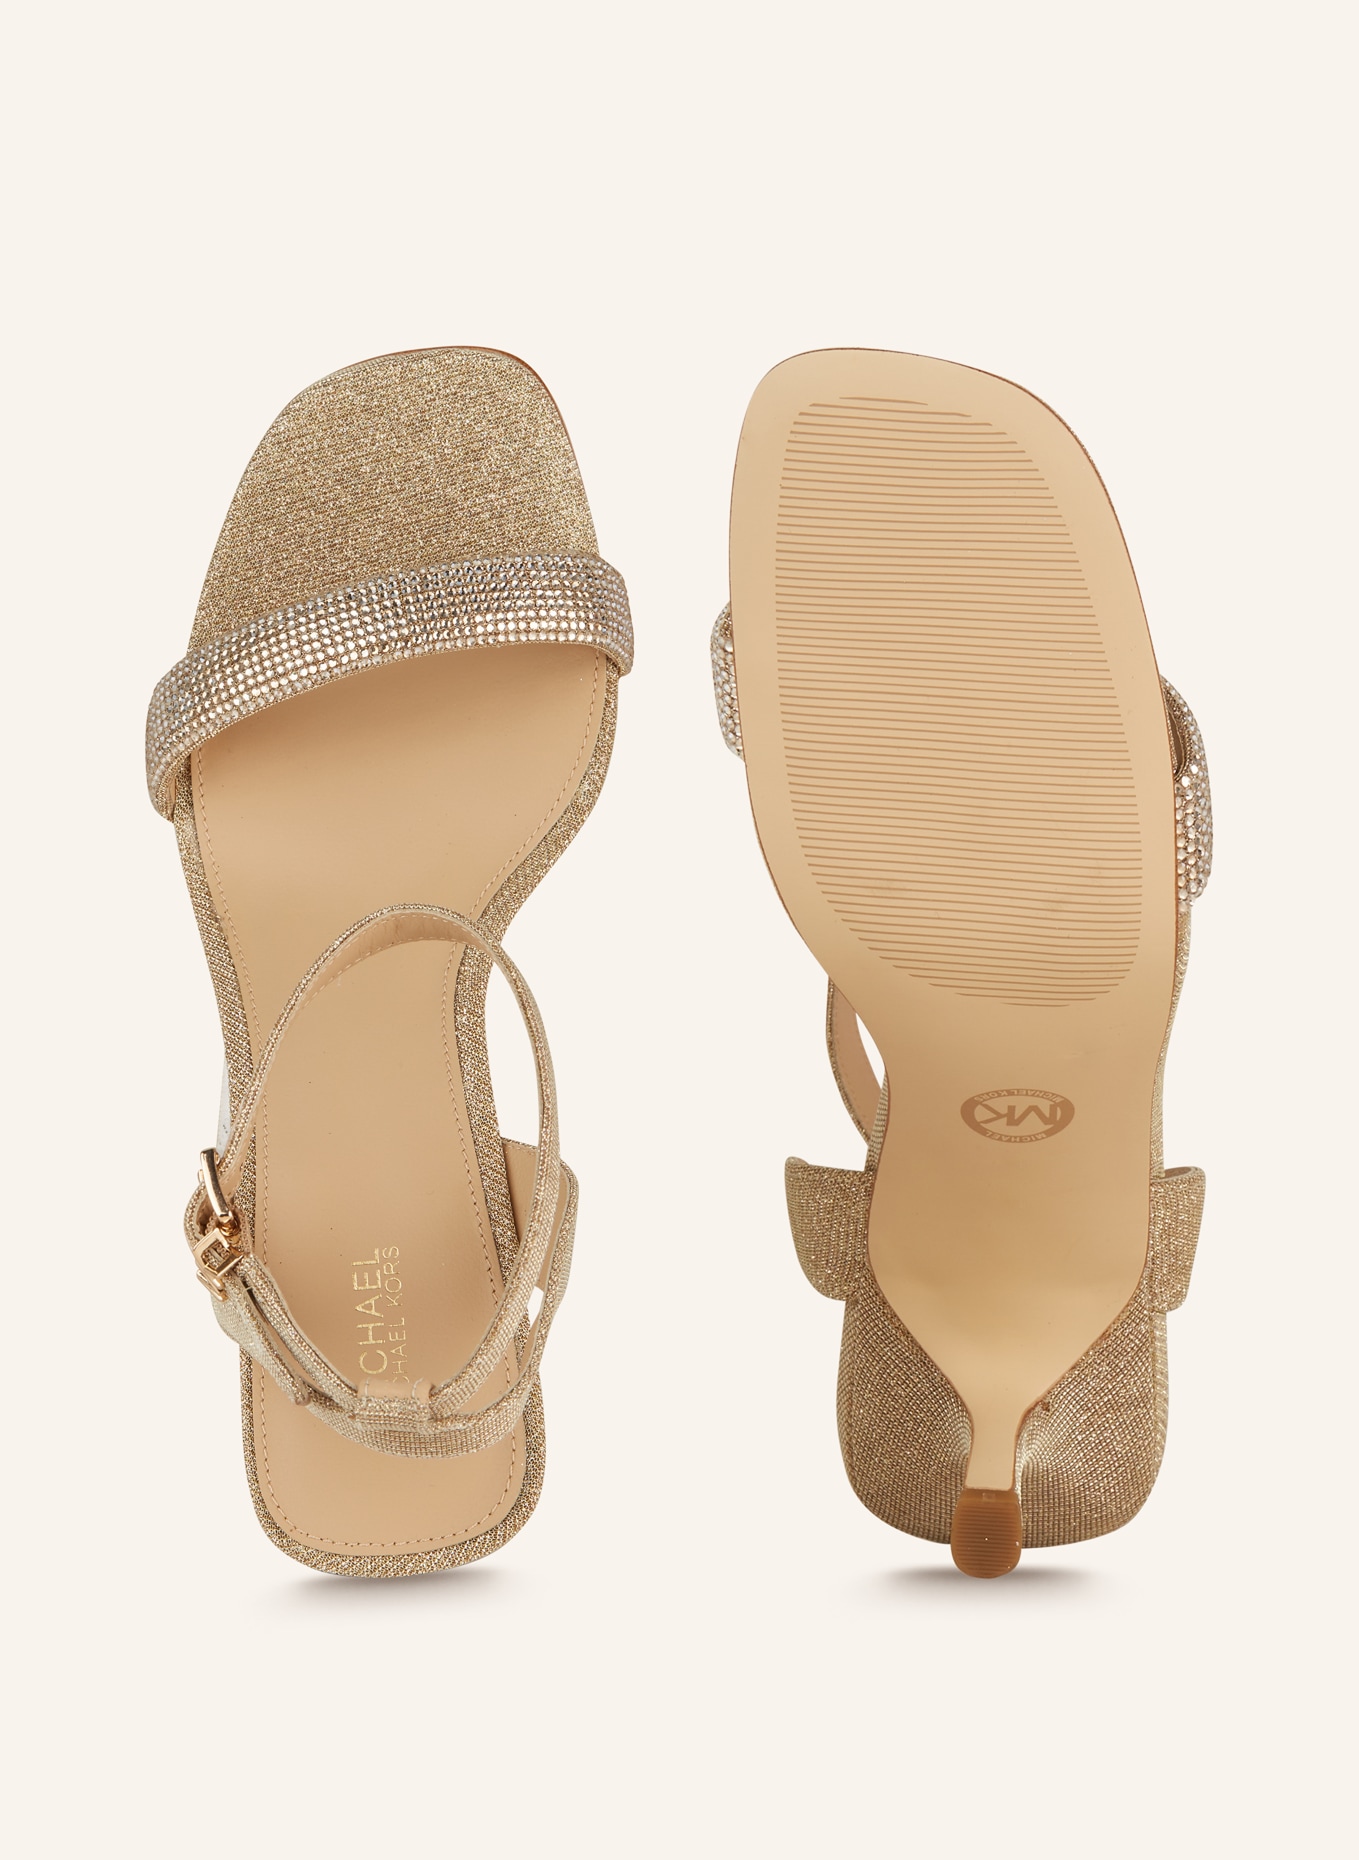 MICHAEL KORS Sandals CARRIE with decorative gems, Color: 740 PALE GOLD (Image 5)